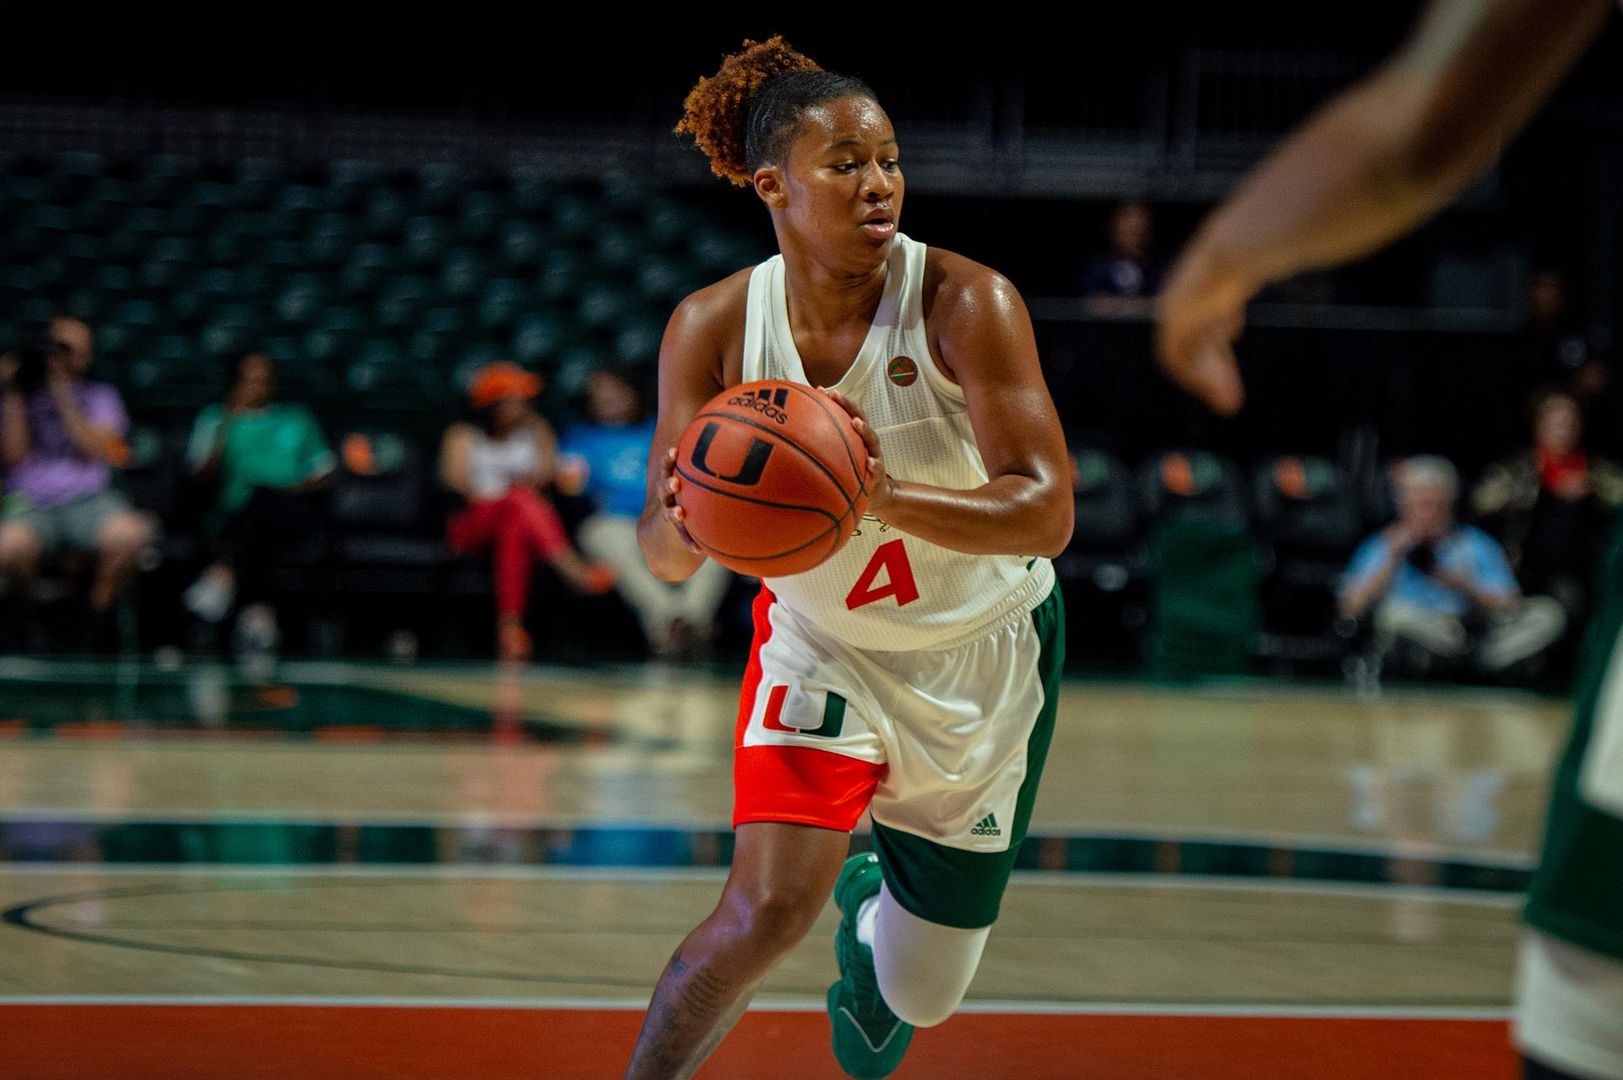 Canes Host Jackson State In Season Opener